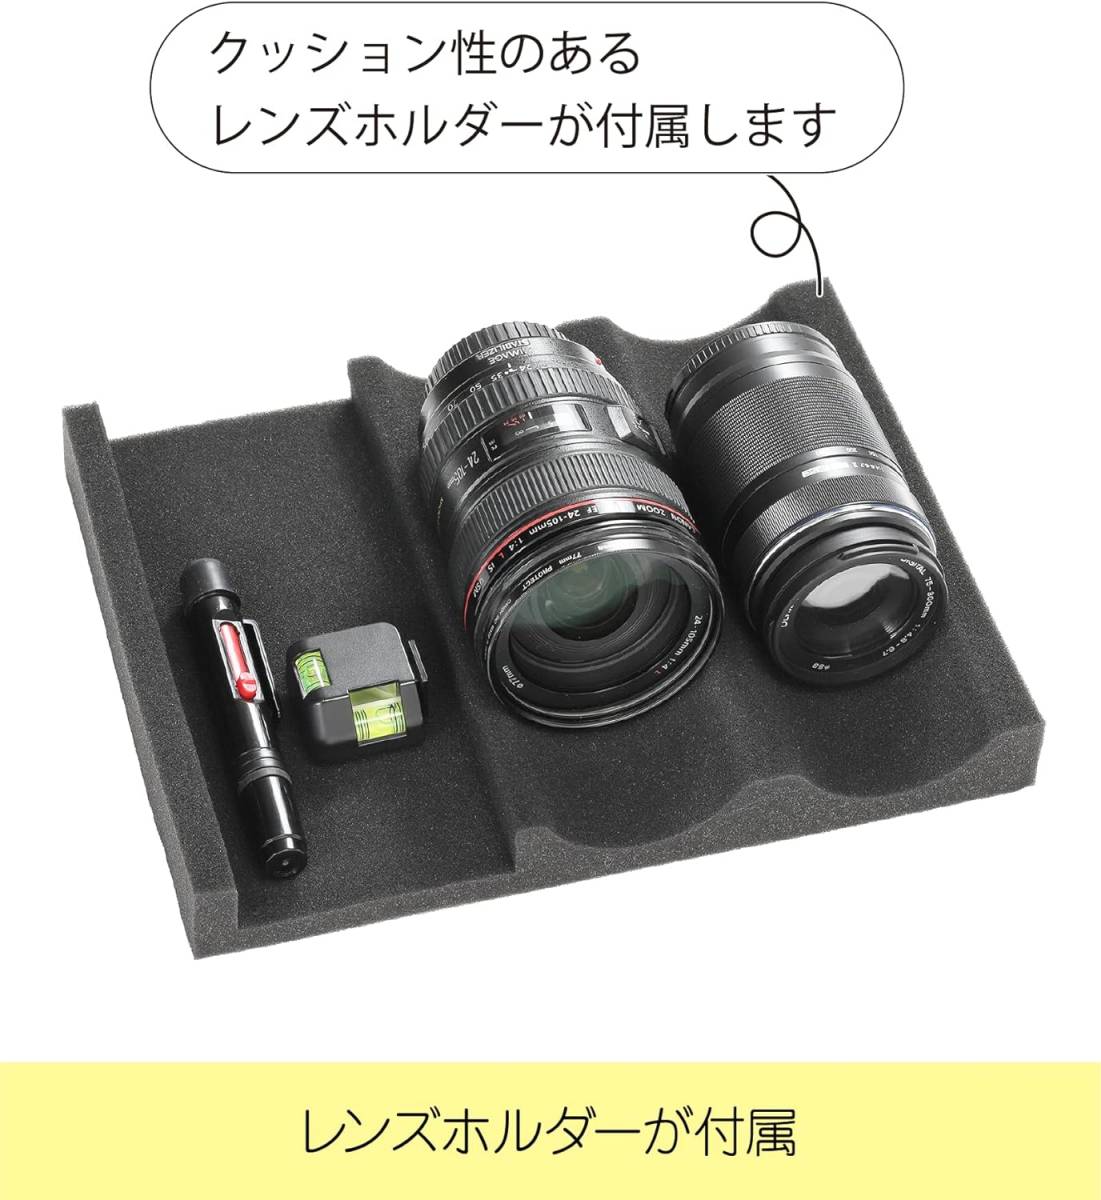 [ new goods * unopened ] Orient living full automation dampproof box ED-25CAM (W) auto k Lynn dry installing dampproof box 